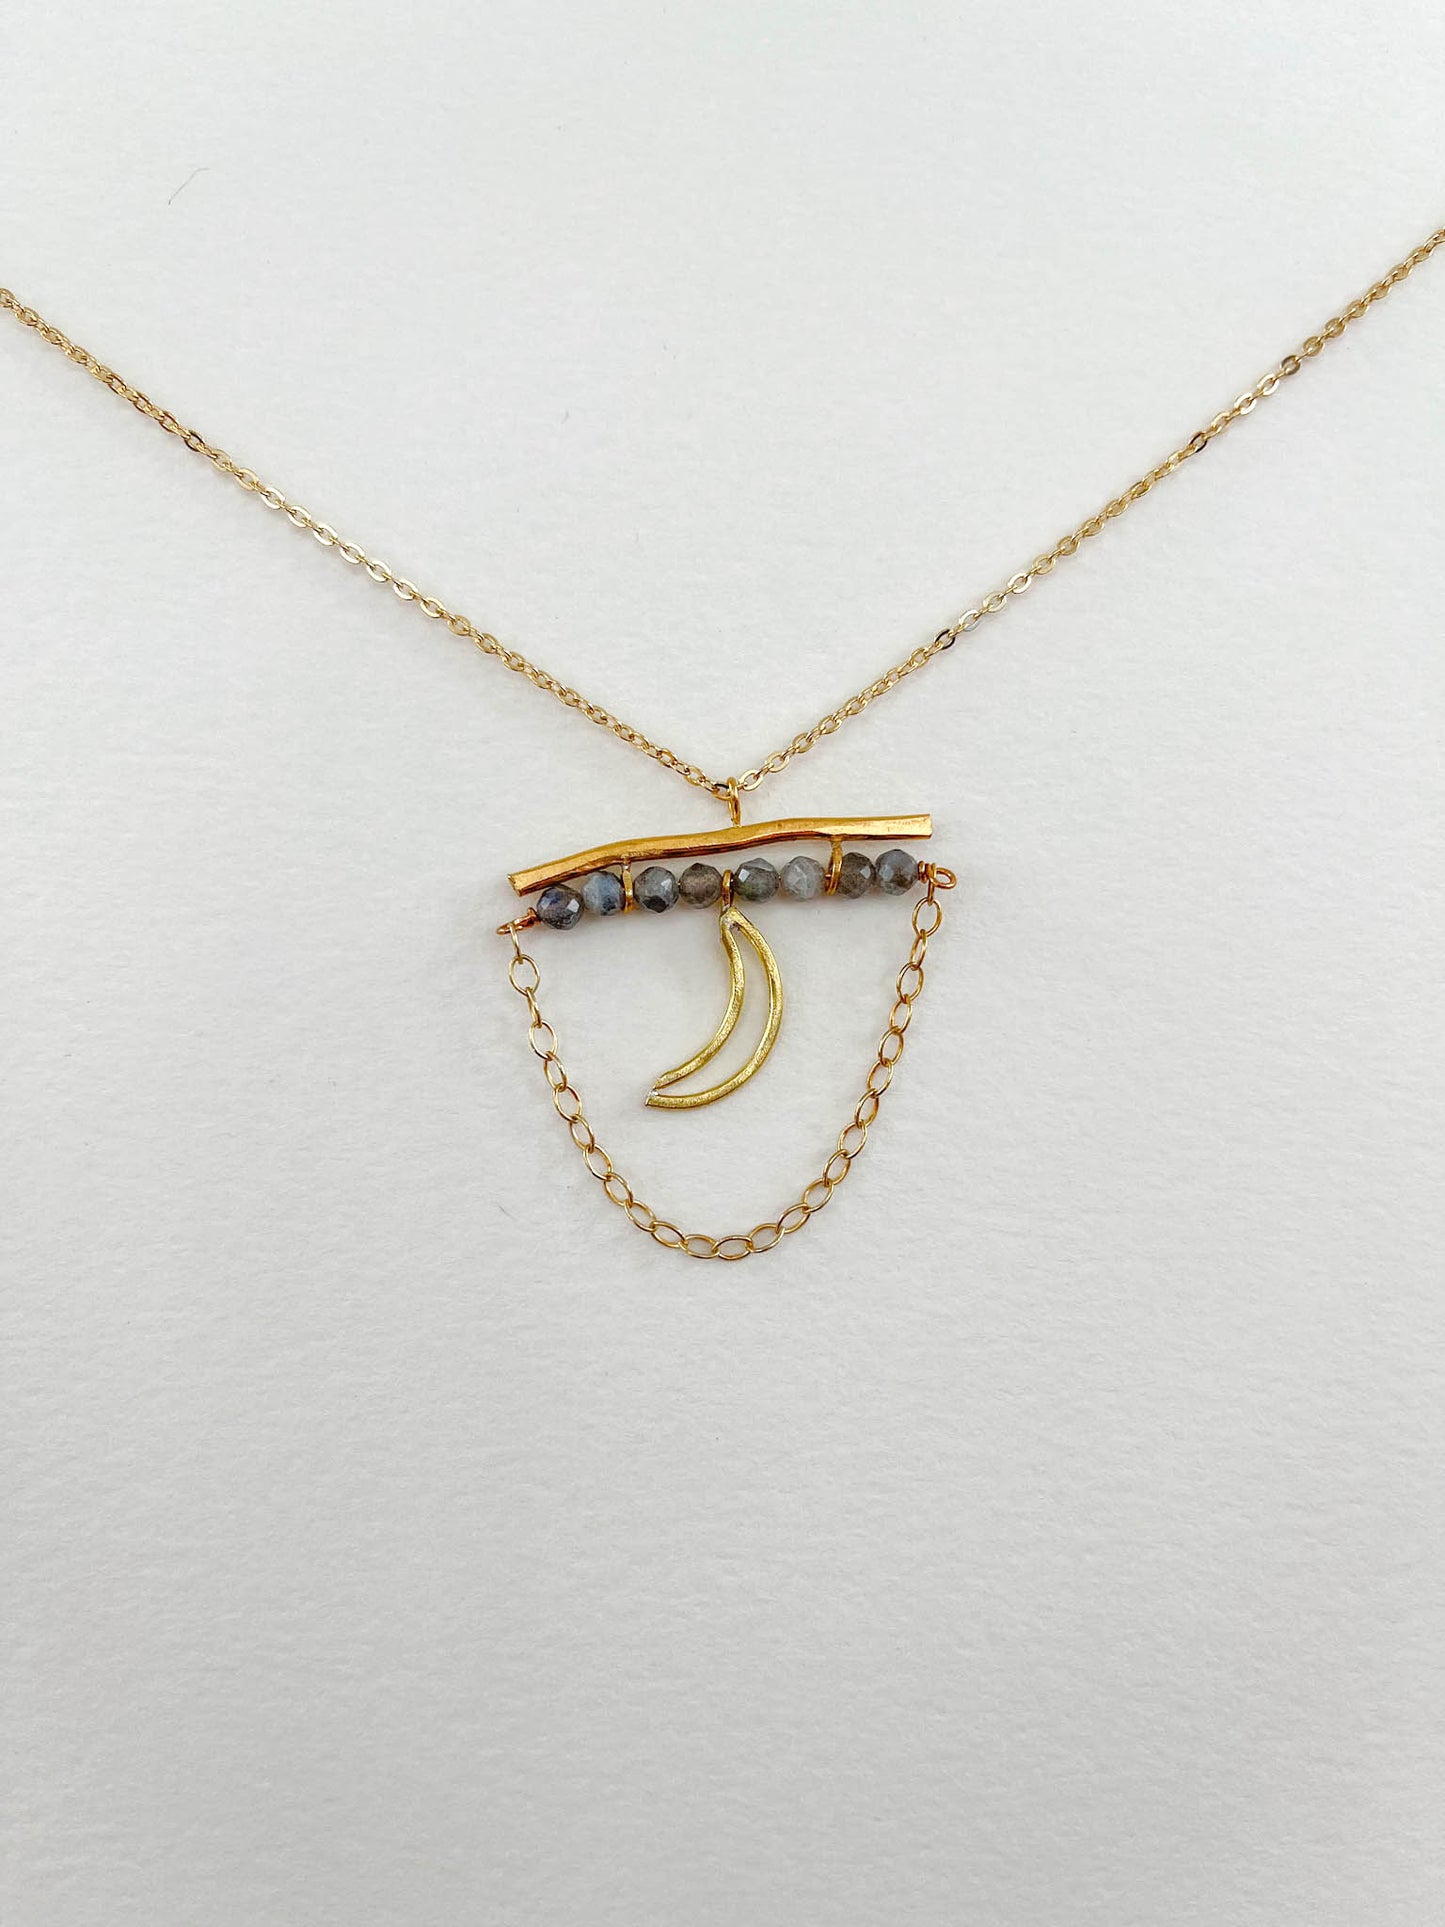 The Moonlight Necklace